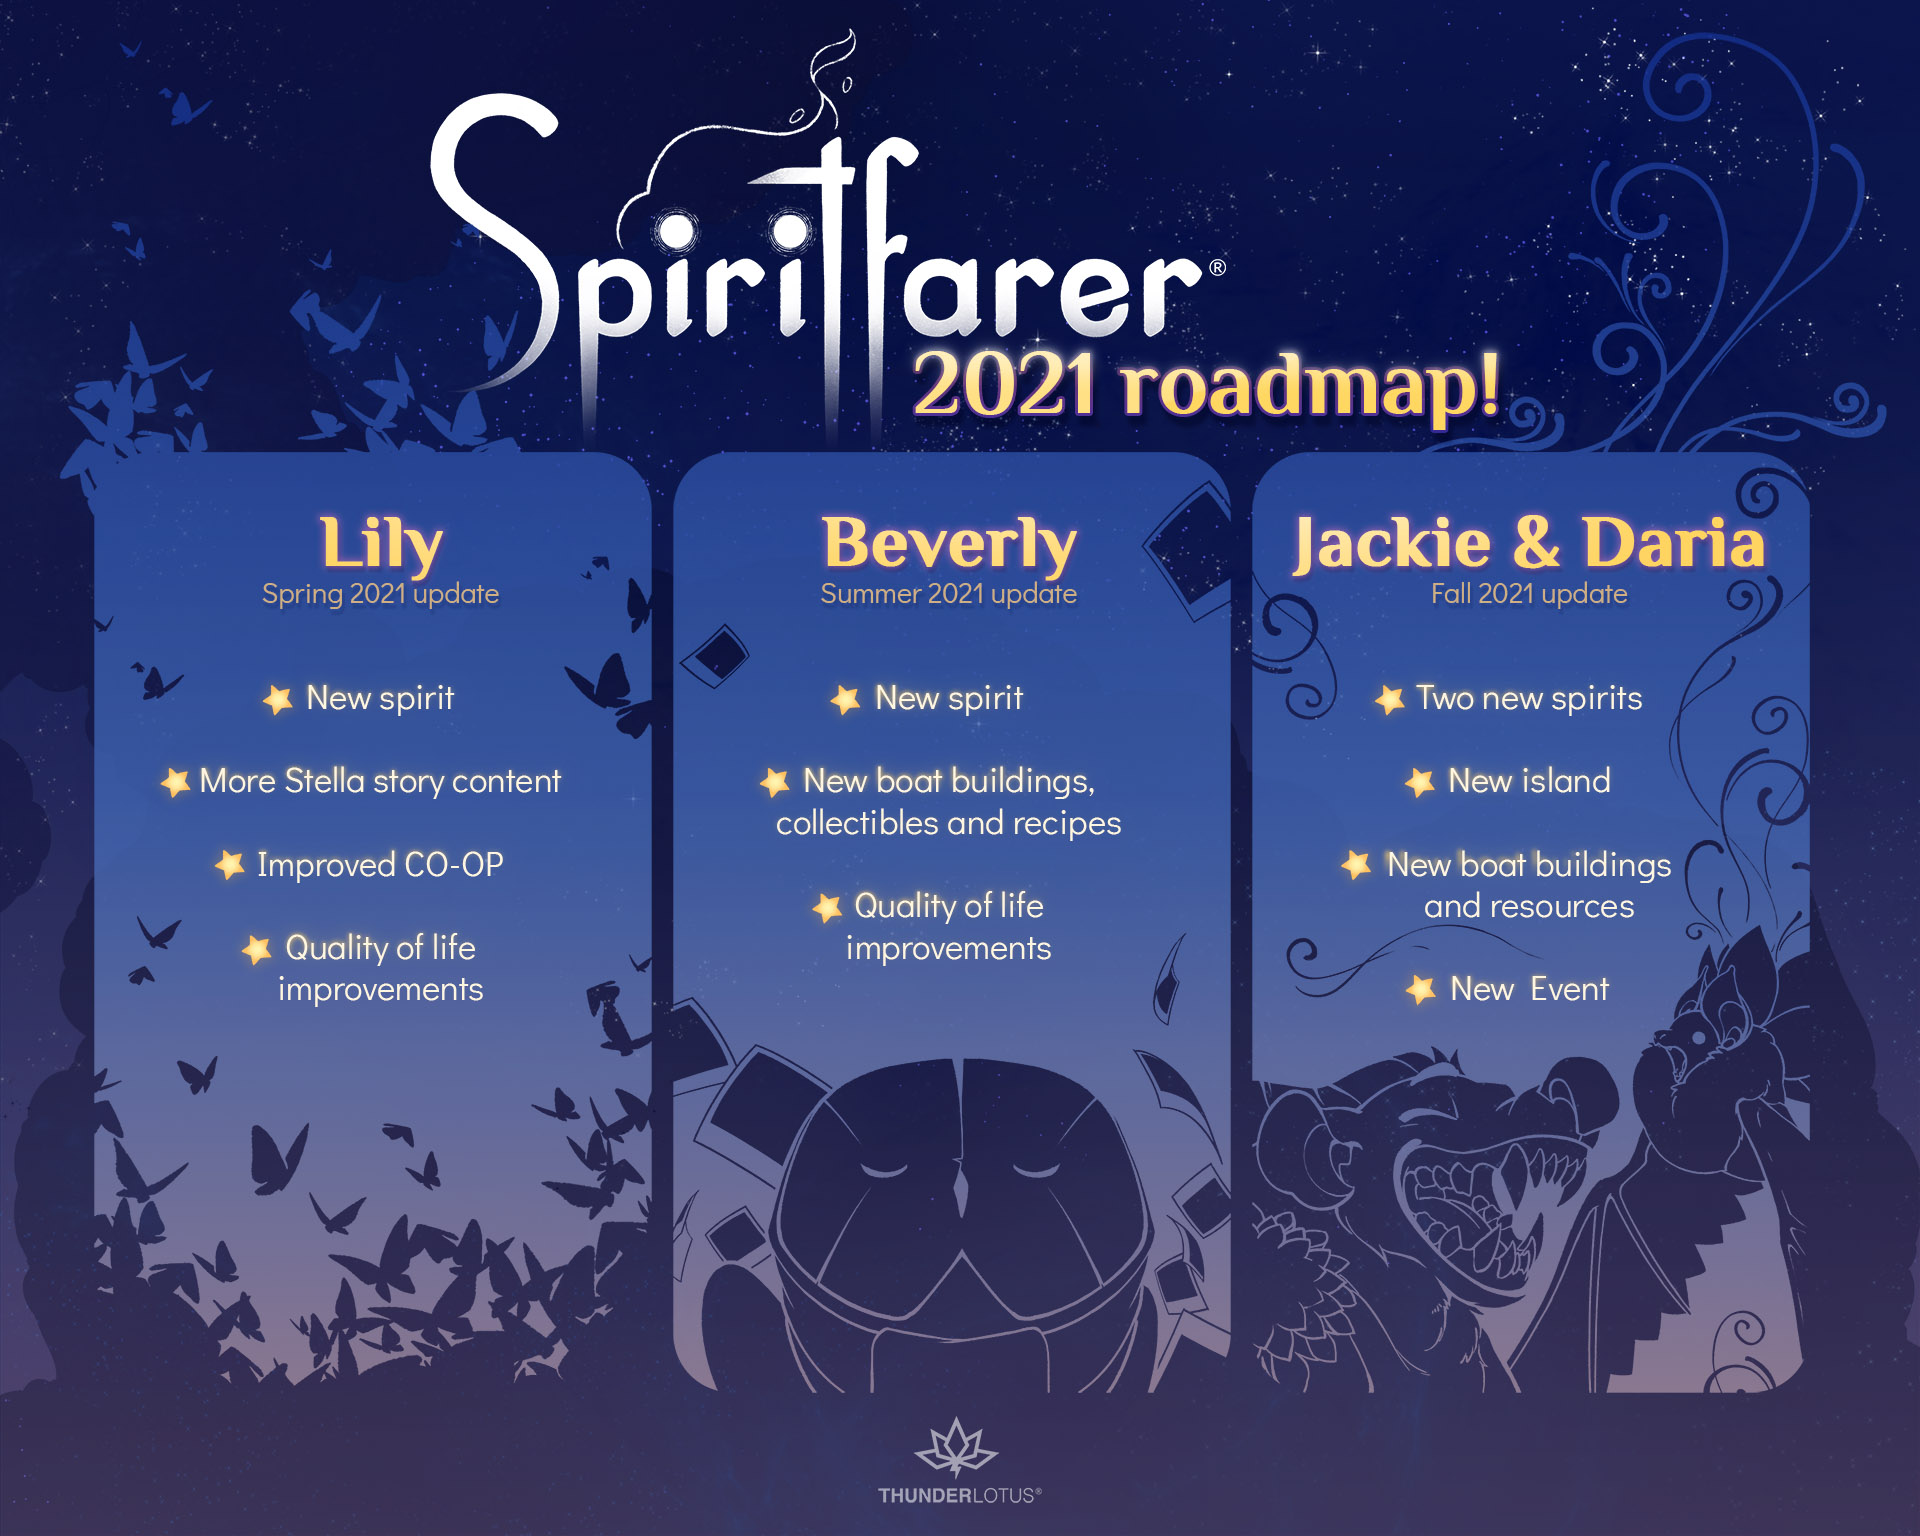 The roadmap for updating Spiritfarer has been launched